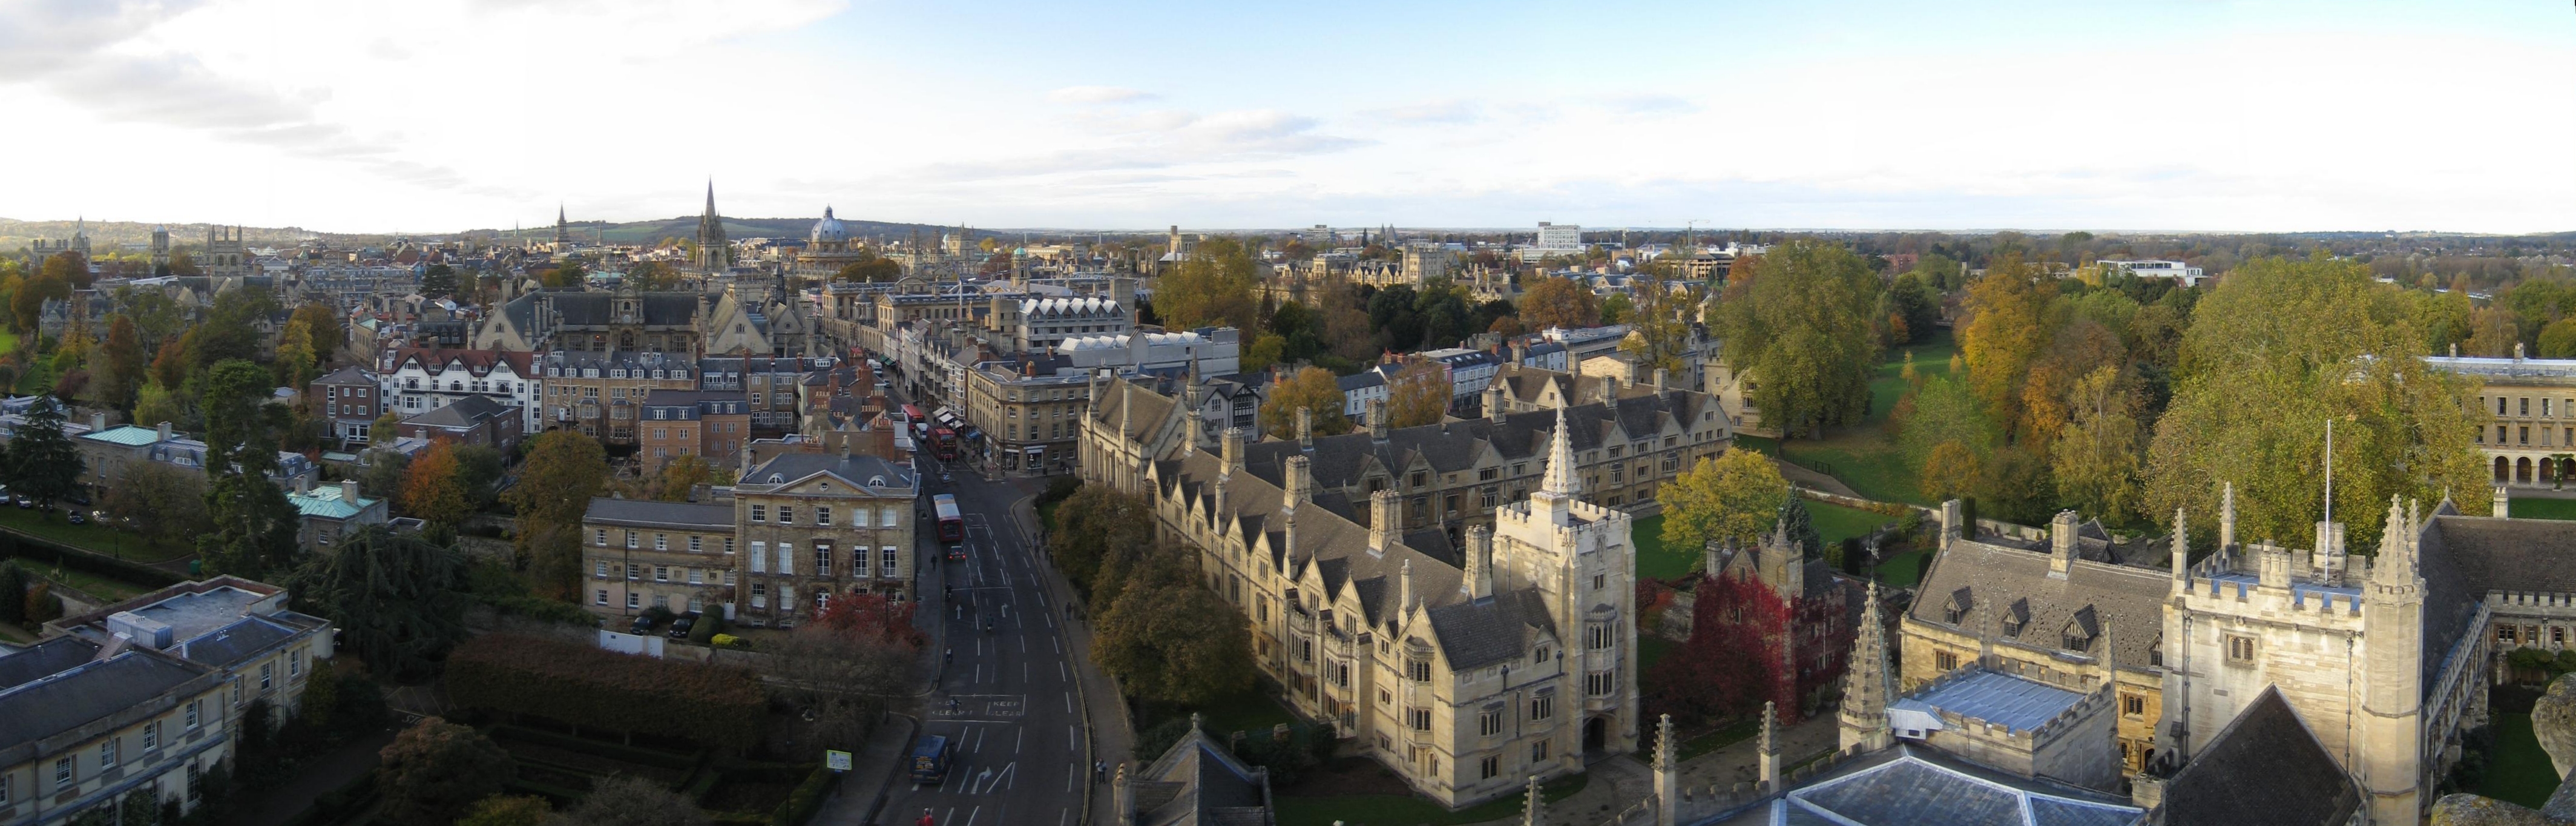 Oxford panorama from Magdalen College